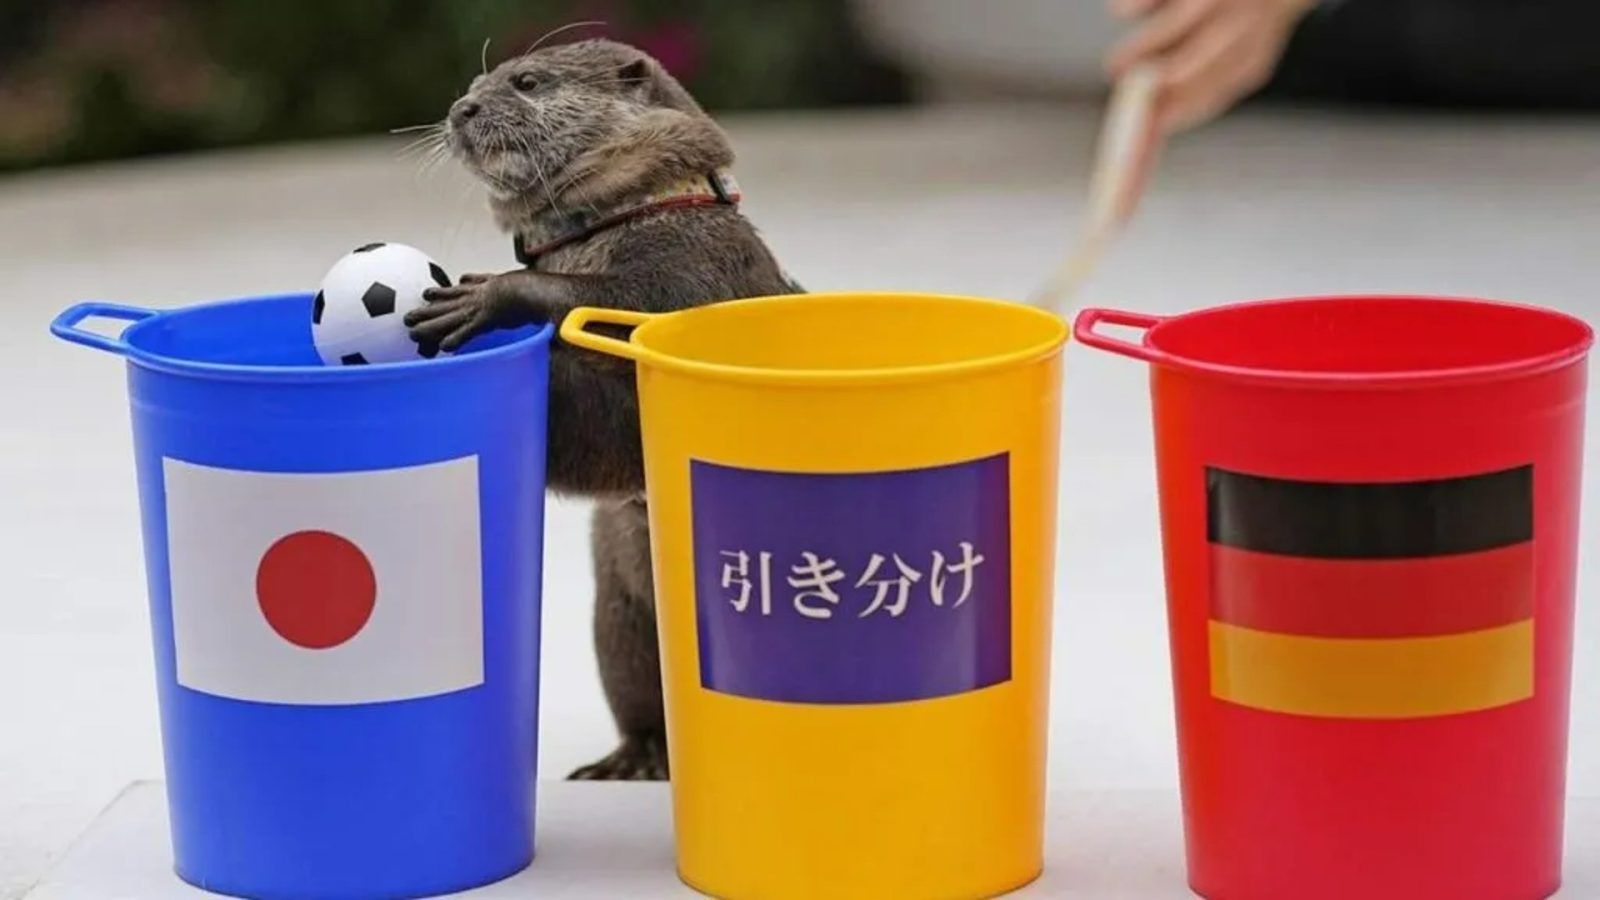 A Japanese Otter is now predicting the 2022 FIFA World Cup matches